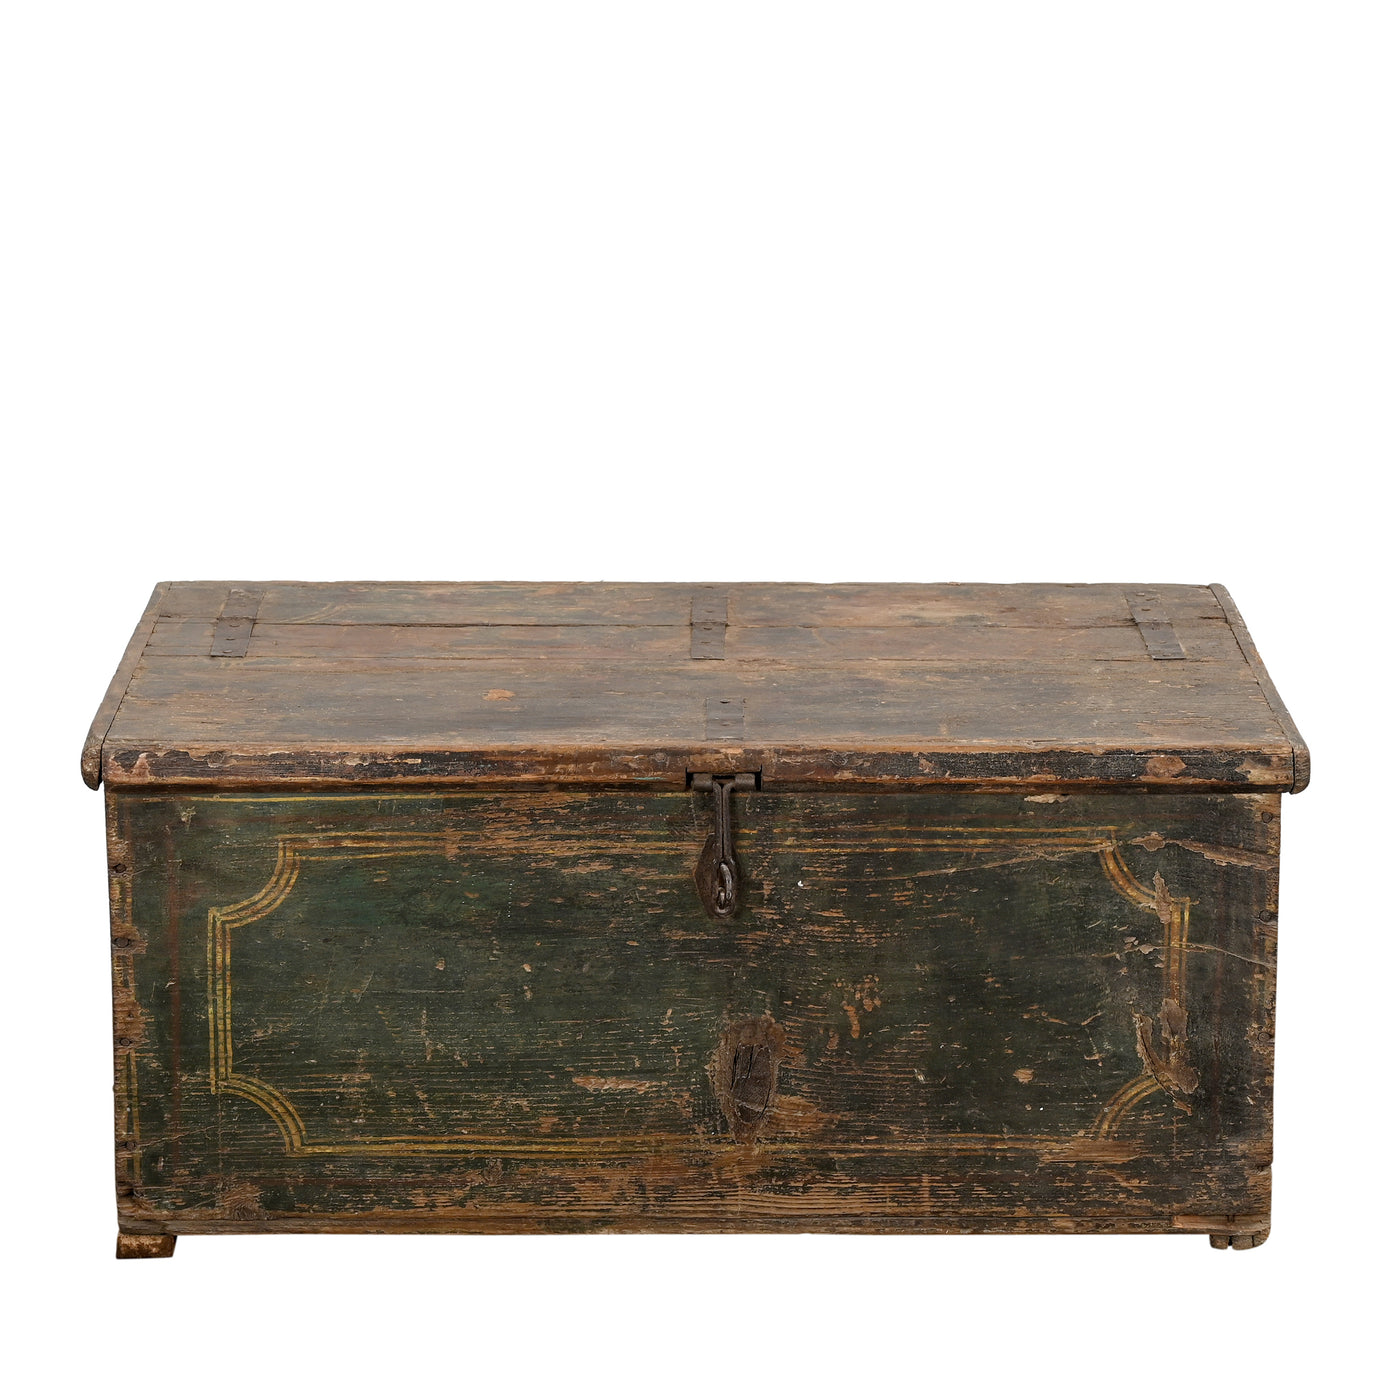 Digha - old wooden chest n ° 2